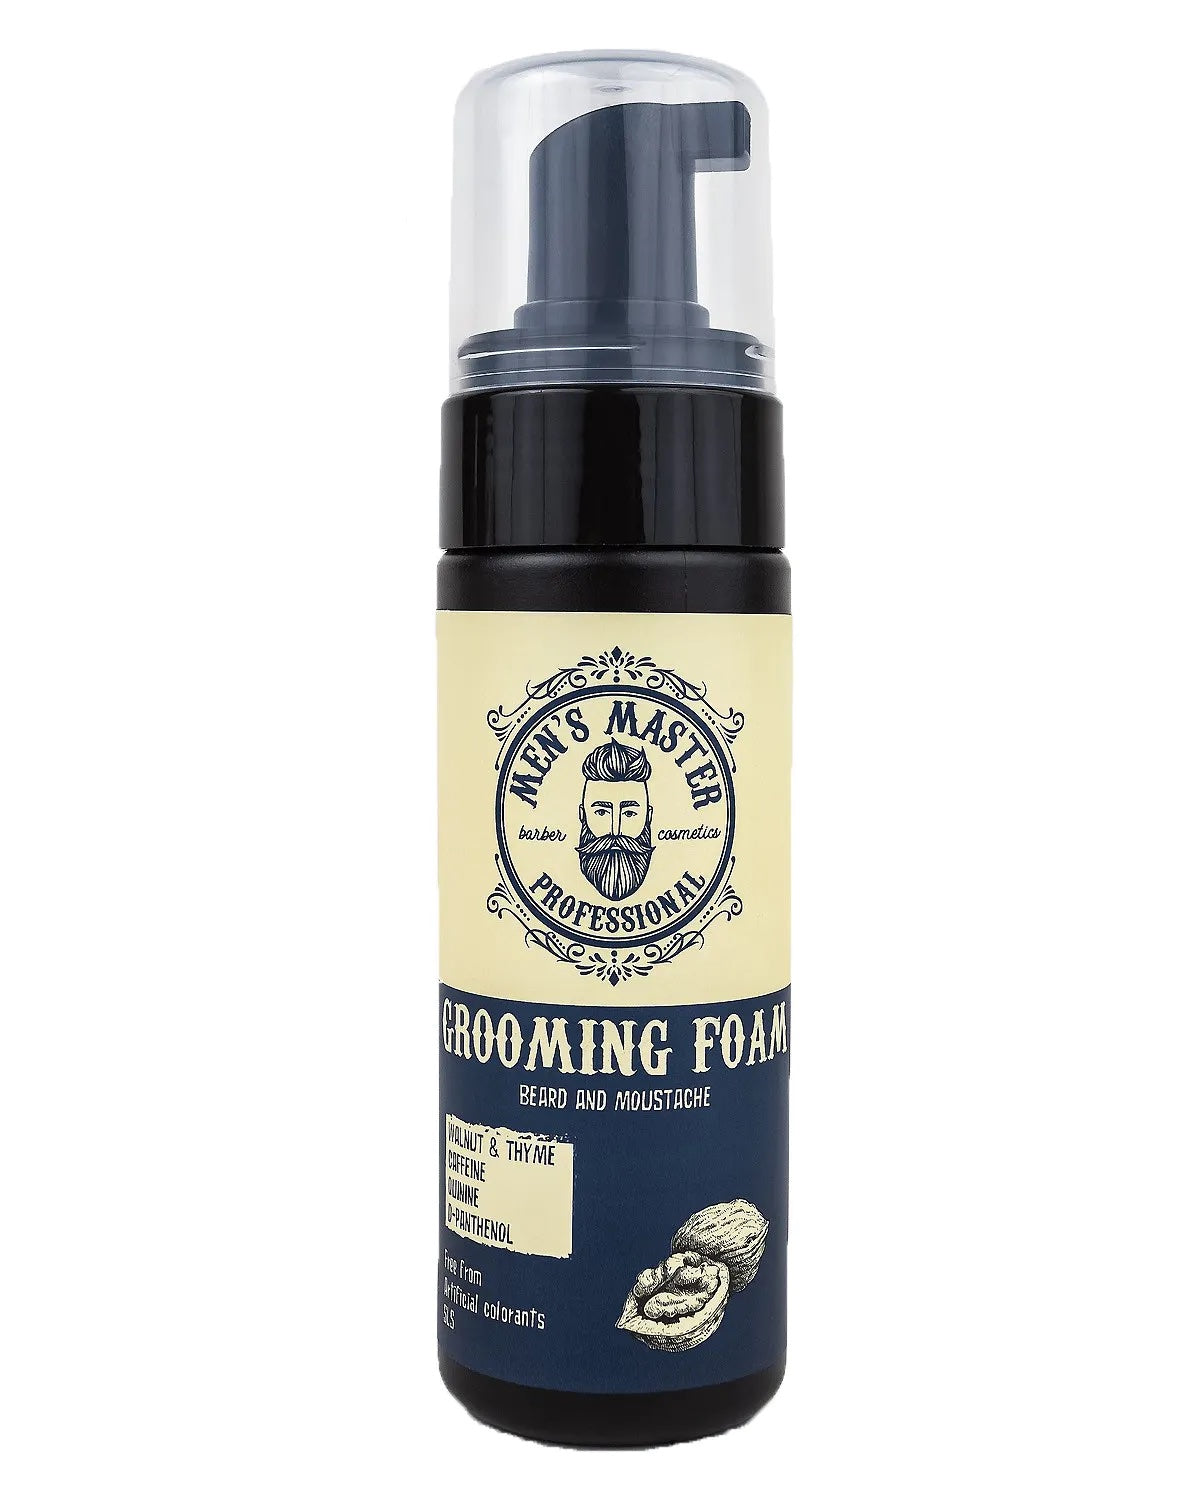 Styling foam for beards and hair⎪ Men's Master